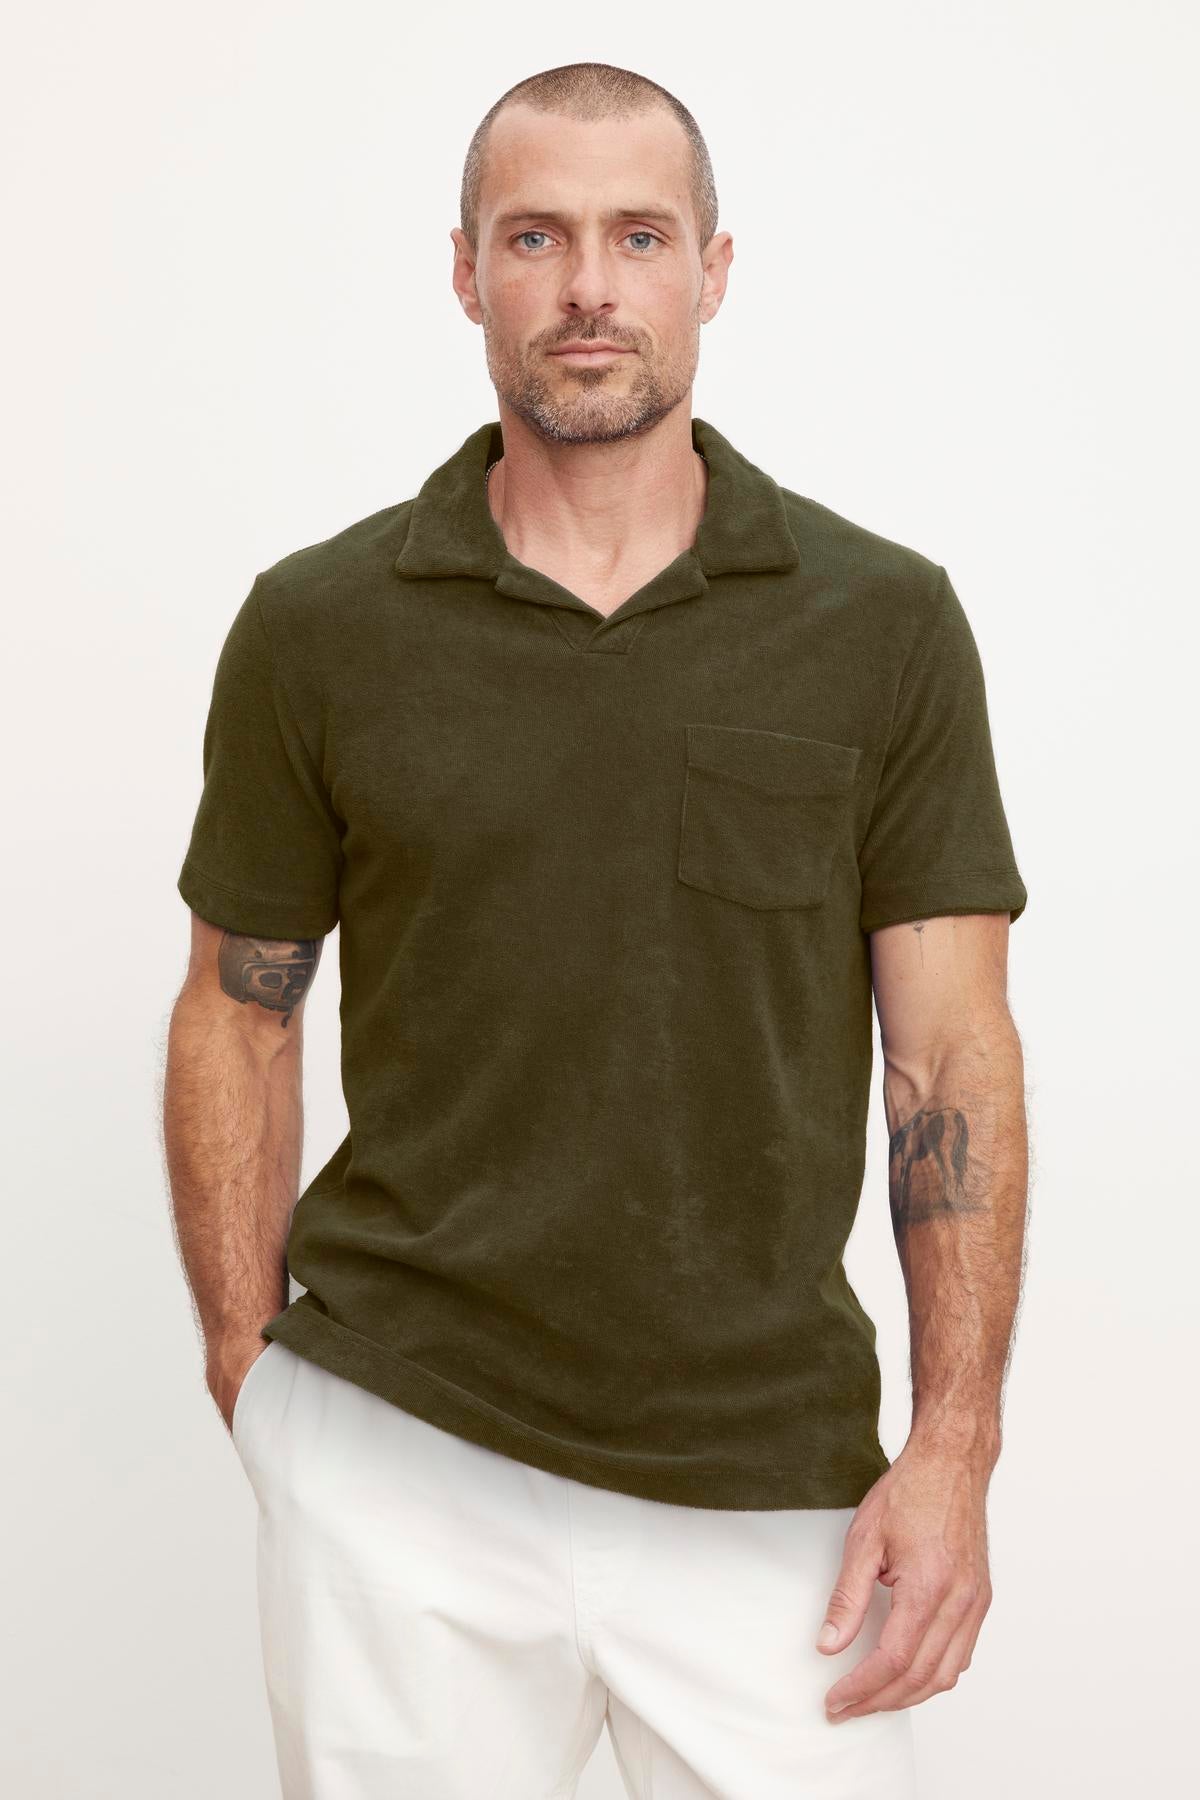 A man with short hair and tattoos on his arms, wearing a Velvet by Graham & Spencer SERGEY POLO polo shirt in dark green with short sleeves and white pants, standing against a light background.-36890717847745